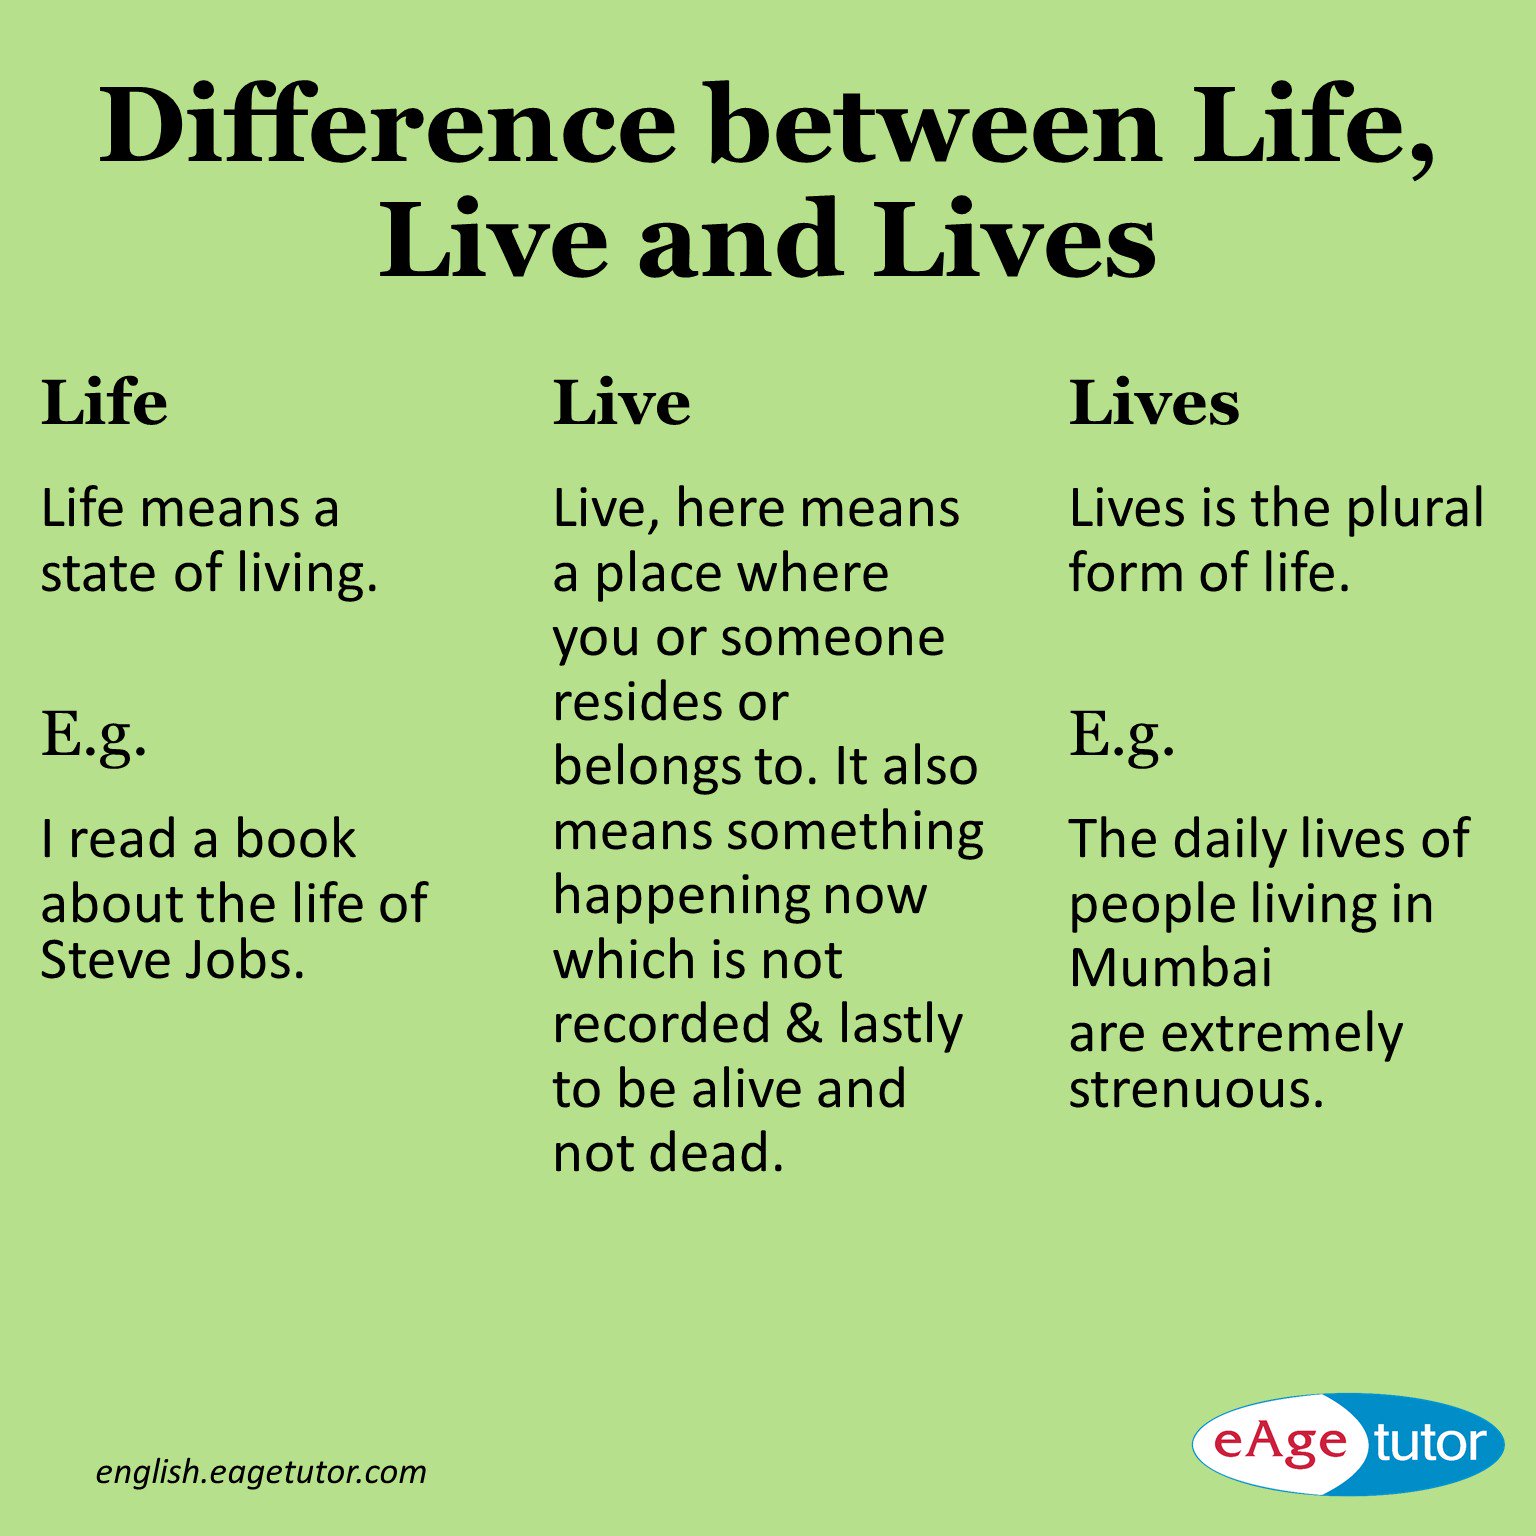 Live vs Life: What's the Difference?